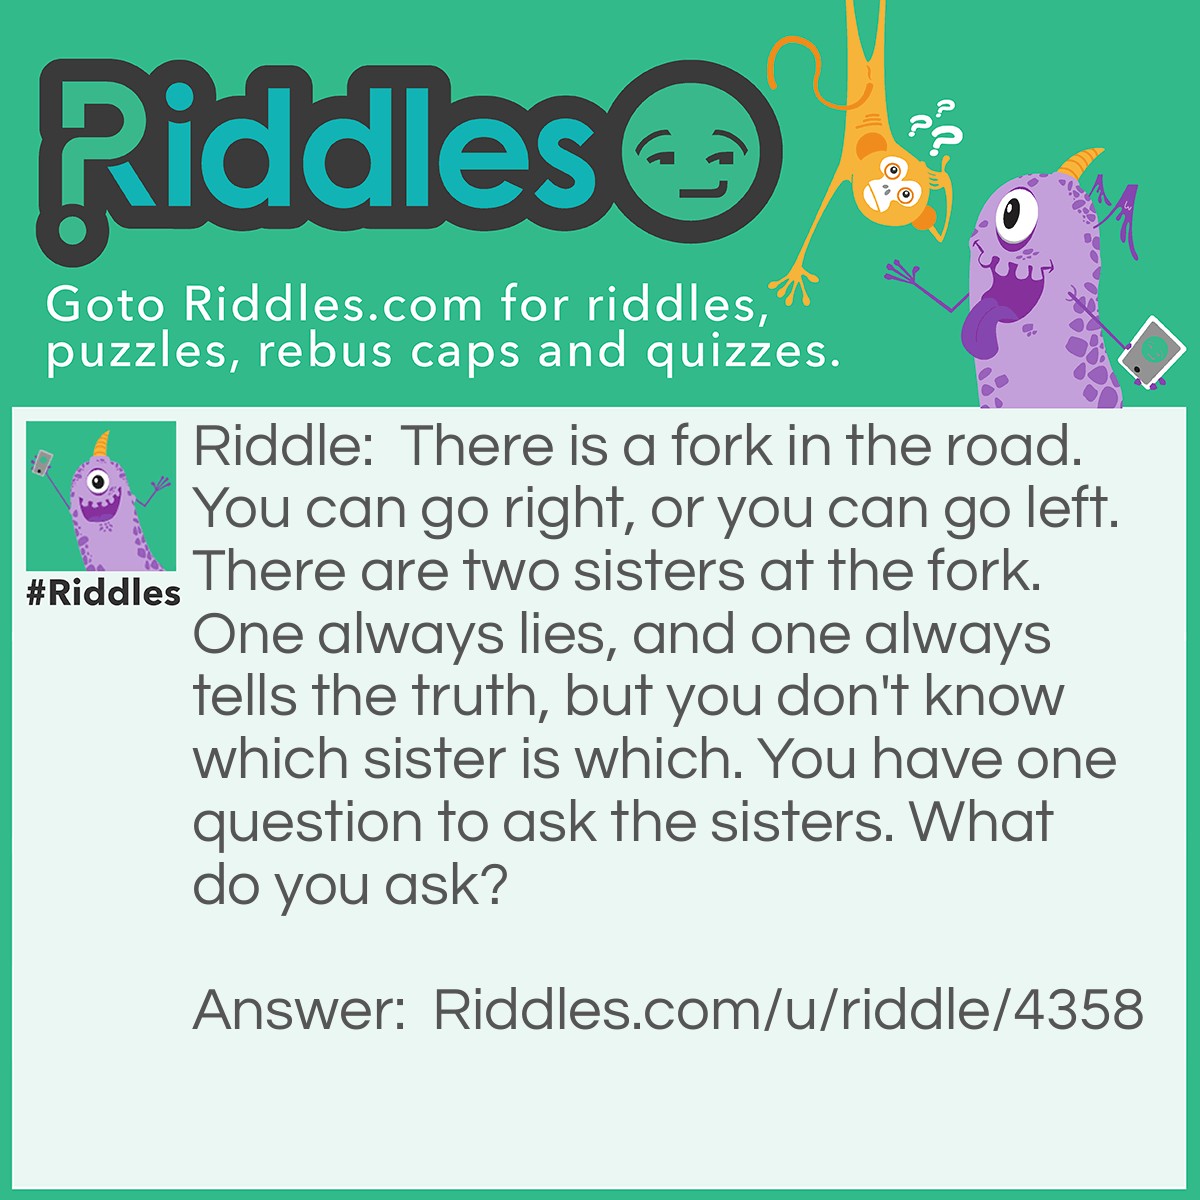 Riddle: There is a fork in the road. You can go right, or you can go left. There are two sisters at the fork. One always lies, and one always tells the truth, but you don't know which sister is which. You have one question to ask the sisters. What do you ask? Answer: What way would your sister say to go? (The one who tells the truth would say that her sister would lie and say the wrong way. The one who always lie would say that her sister would lie and say the wrong way. Then you would go the other way.)